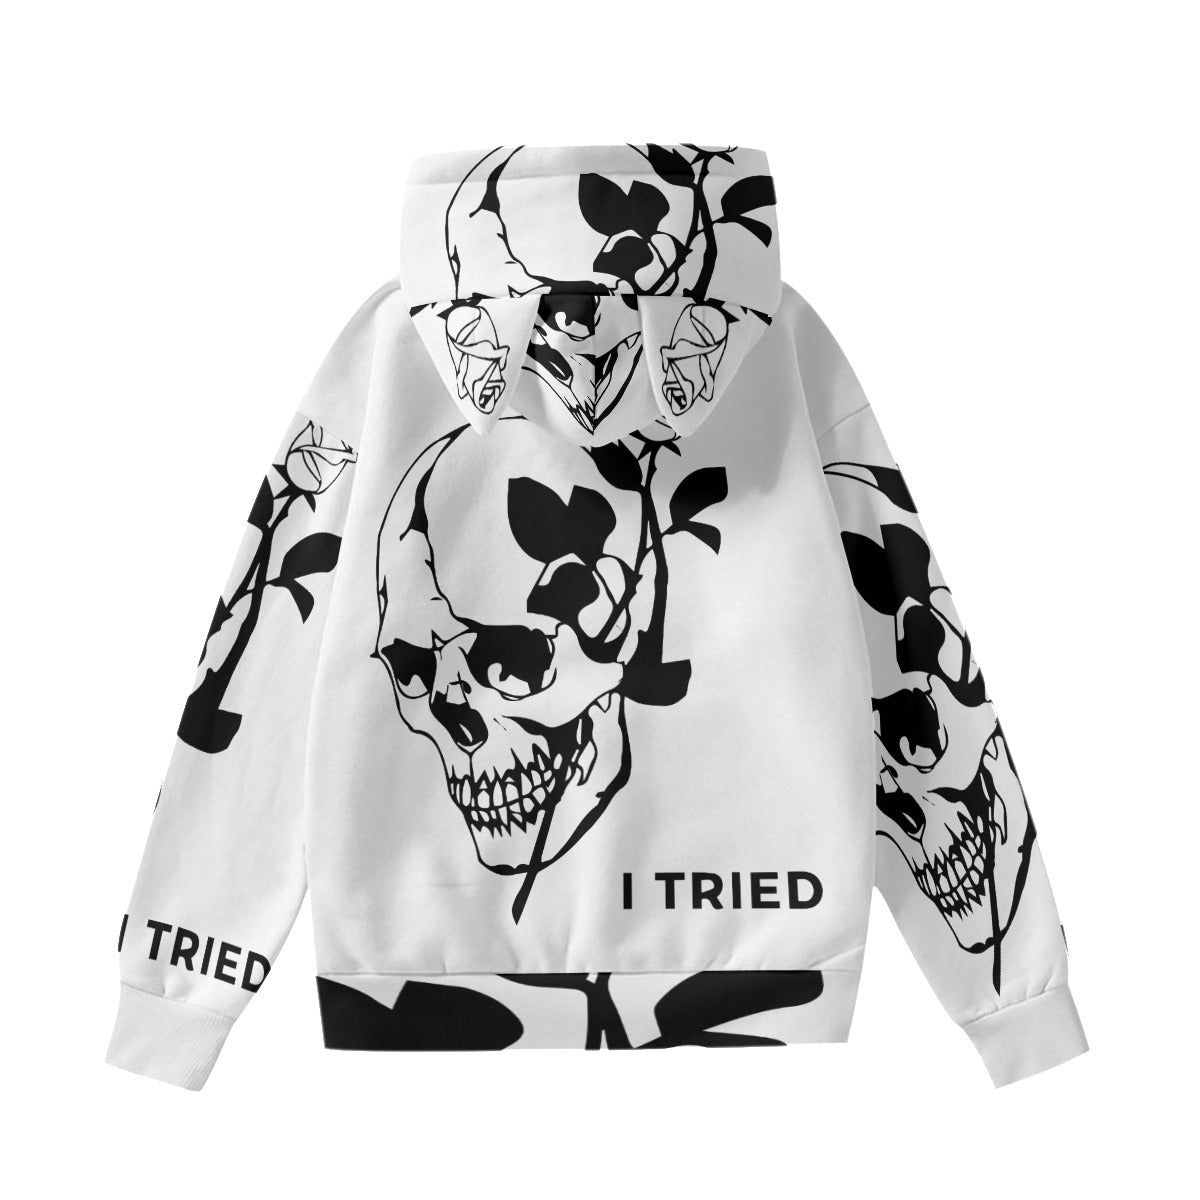 Halloween Mexican skull Gothic Women’s Hoodie With Decorative Ears